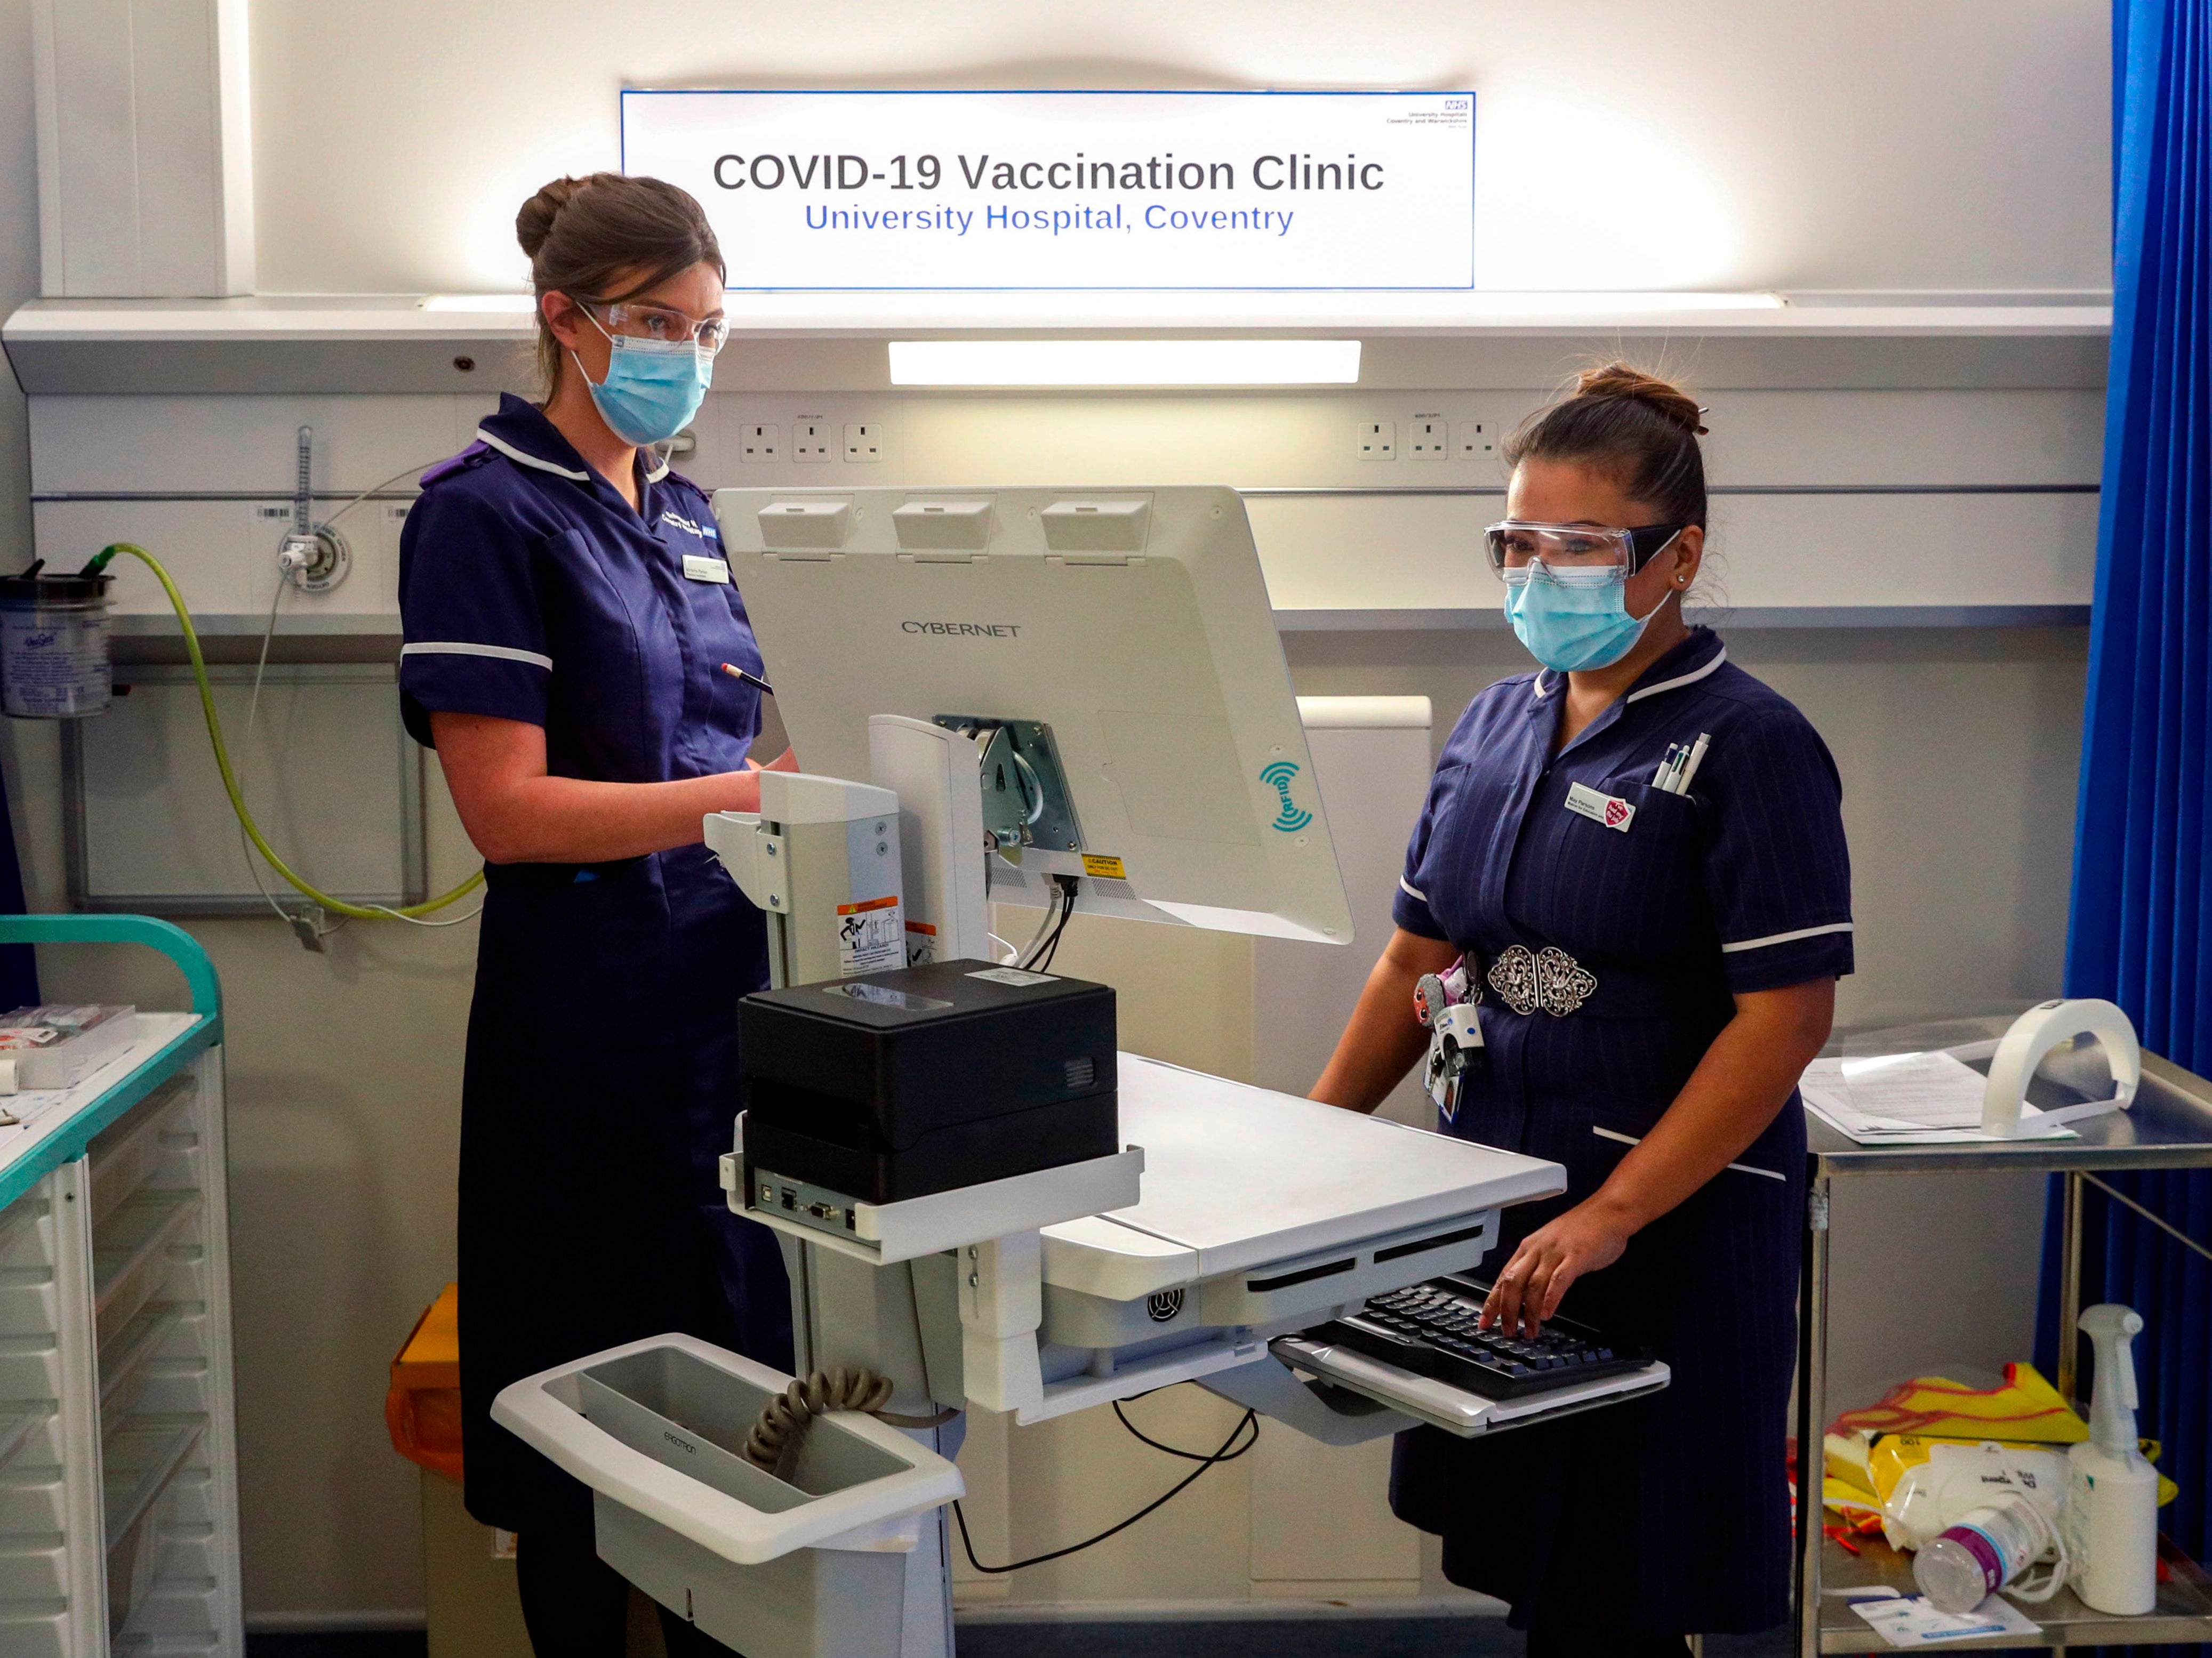 Wearing a protective face coverings to combat the spread of the coronavirus, Matron May Parsons (R) is assessed by Victoria Parker (L) during training in the Covid-19 Vaccination Clinic at the University Hospital in Coventry